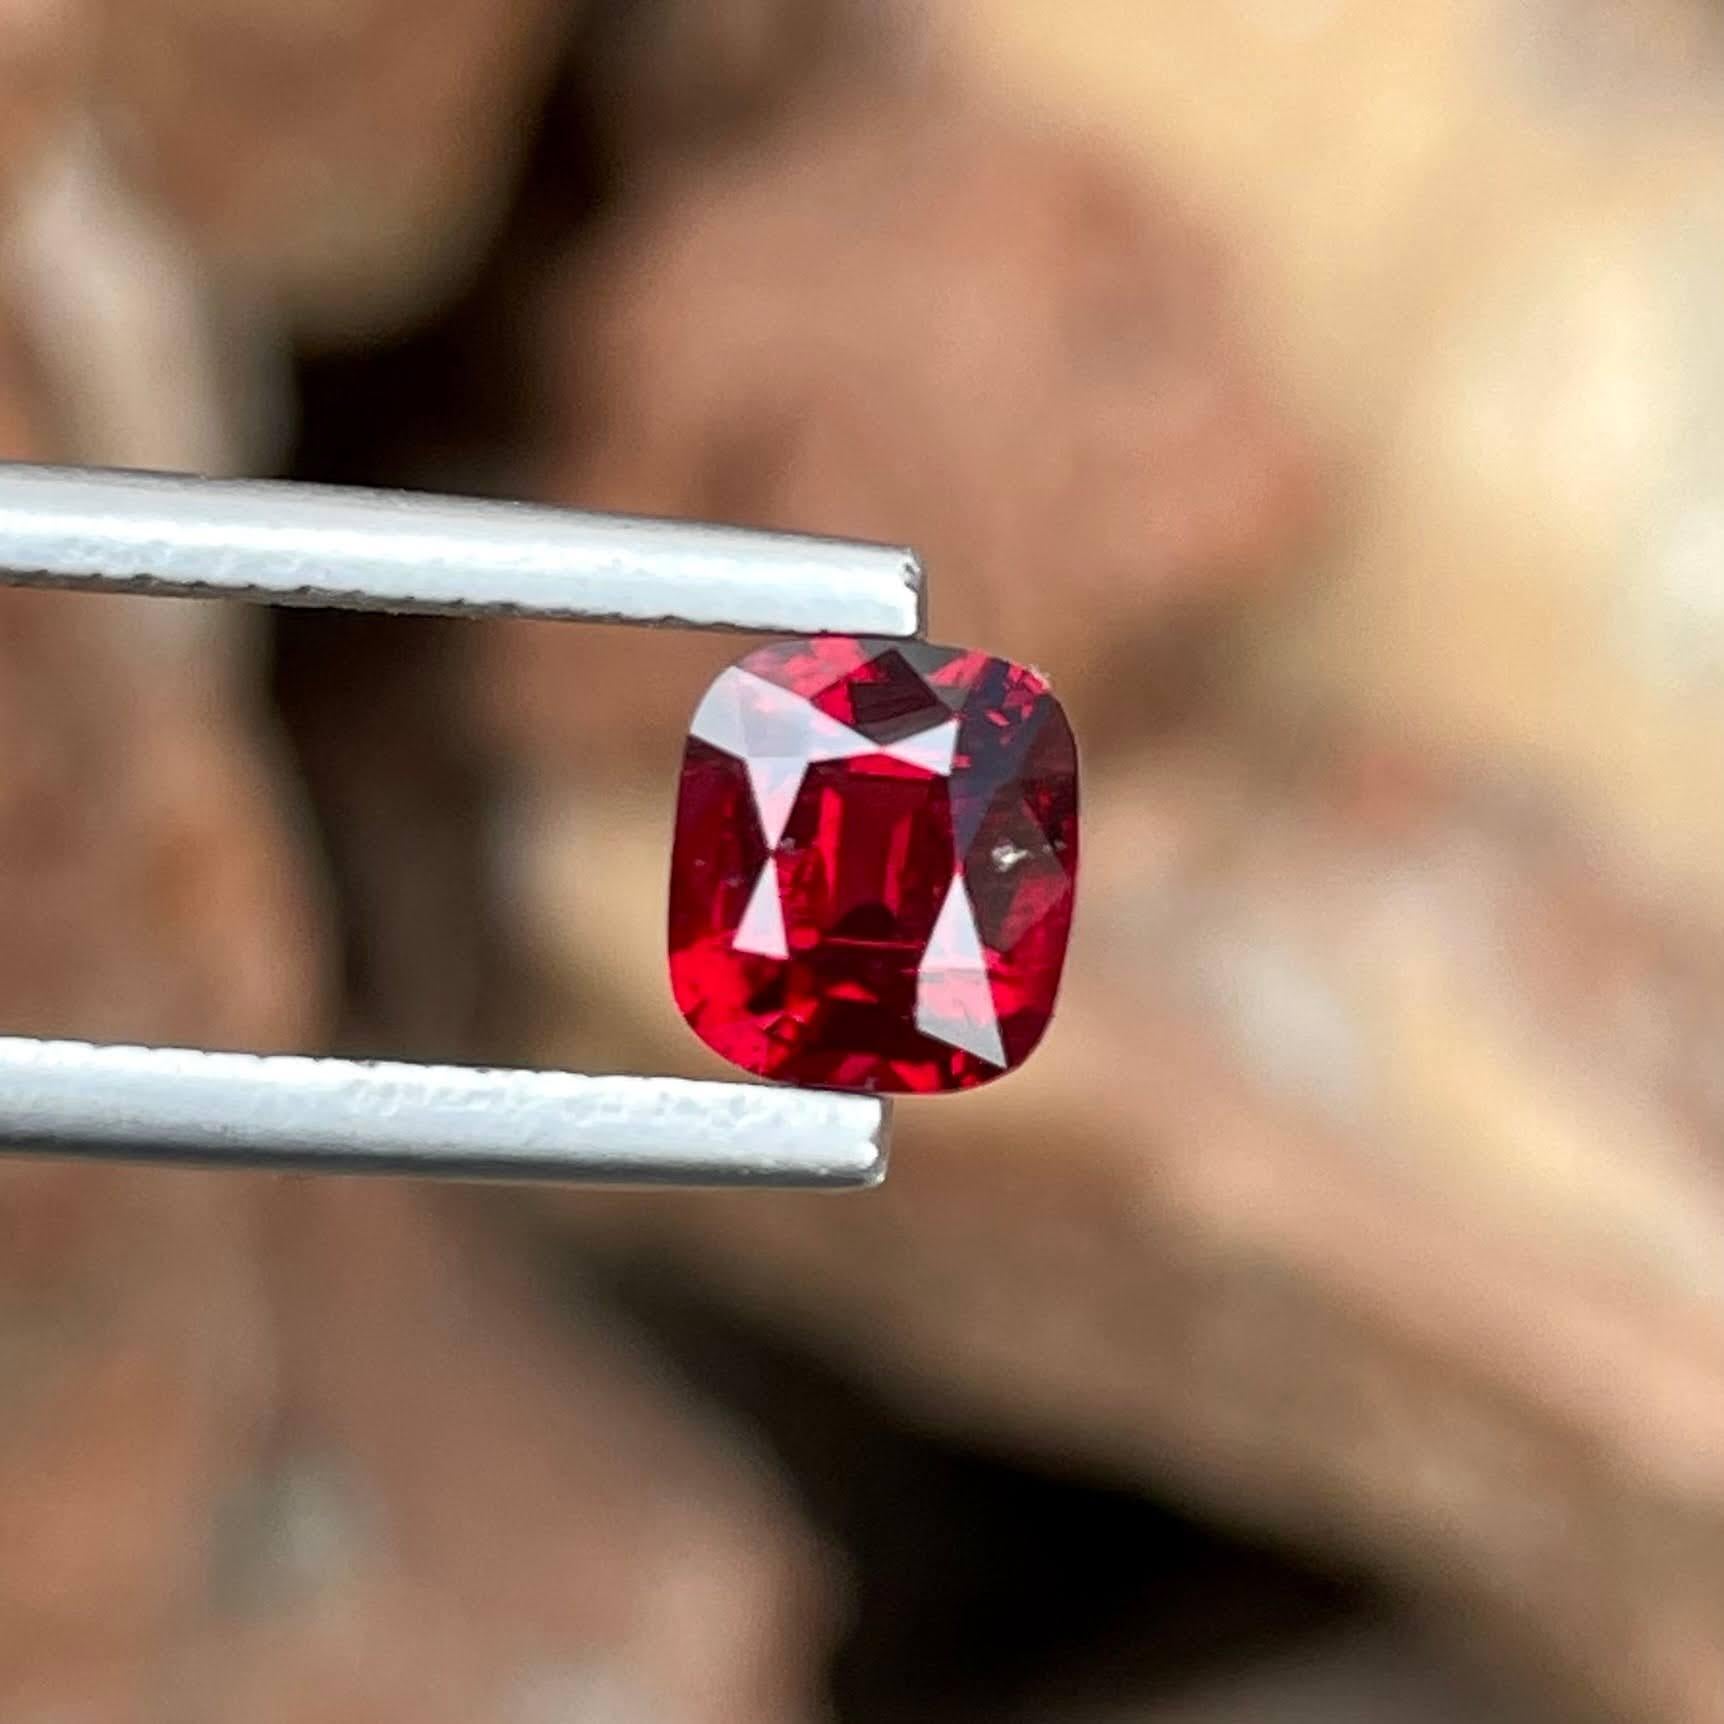 Weight 1.30 carats 
Dimensions 6.39x5.78x4.00 mm
Treatment none 
Origin Burma 
Clarity VVS
Shape cushion 
Cut fancy cushion 




Behold the allure of this exquisite 1.30 carats Natural Red Burmese Spinel, a gemstone of unparalleled beauty and